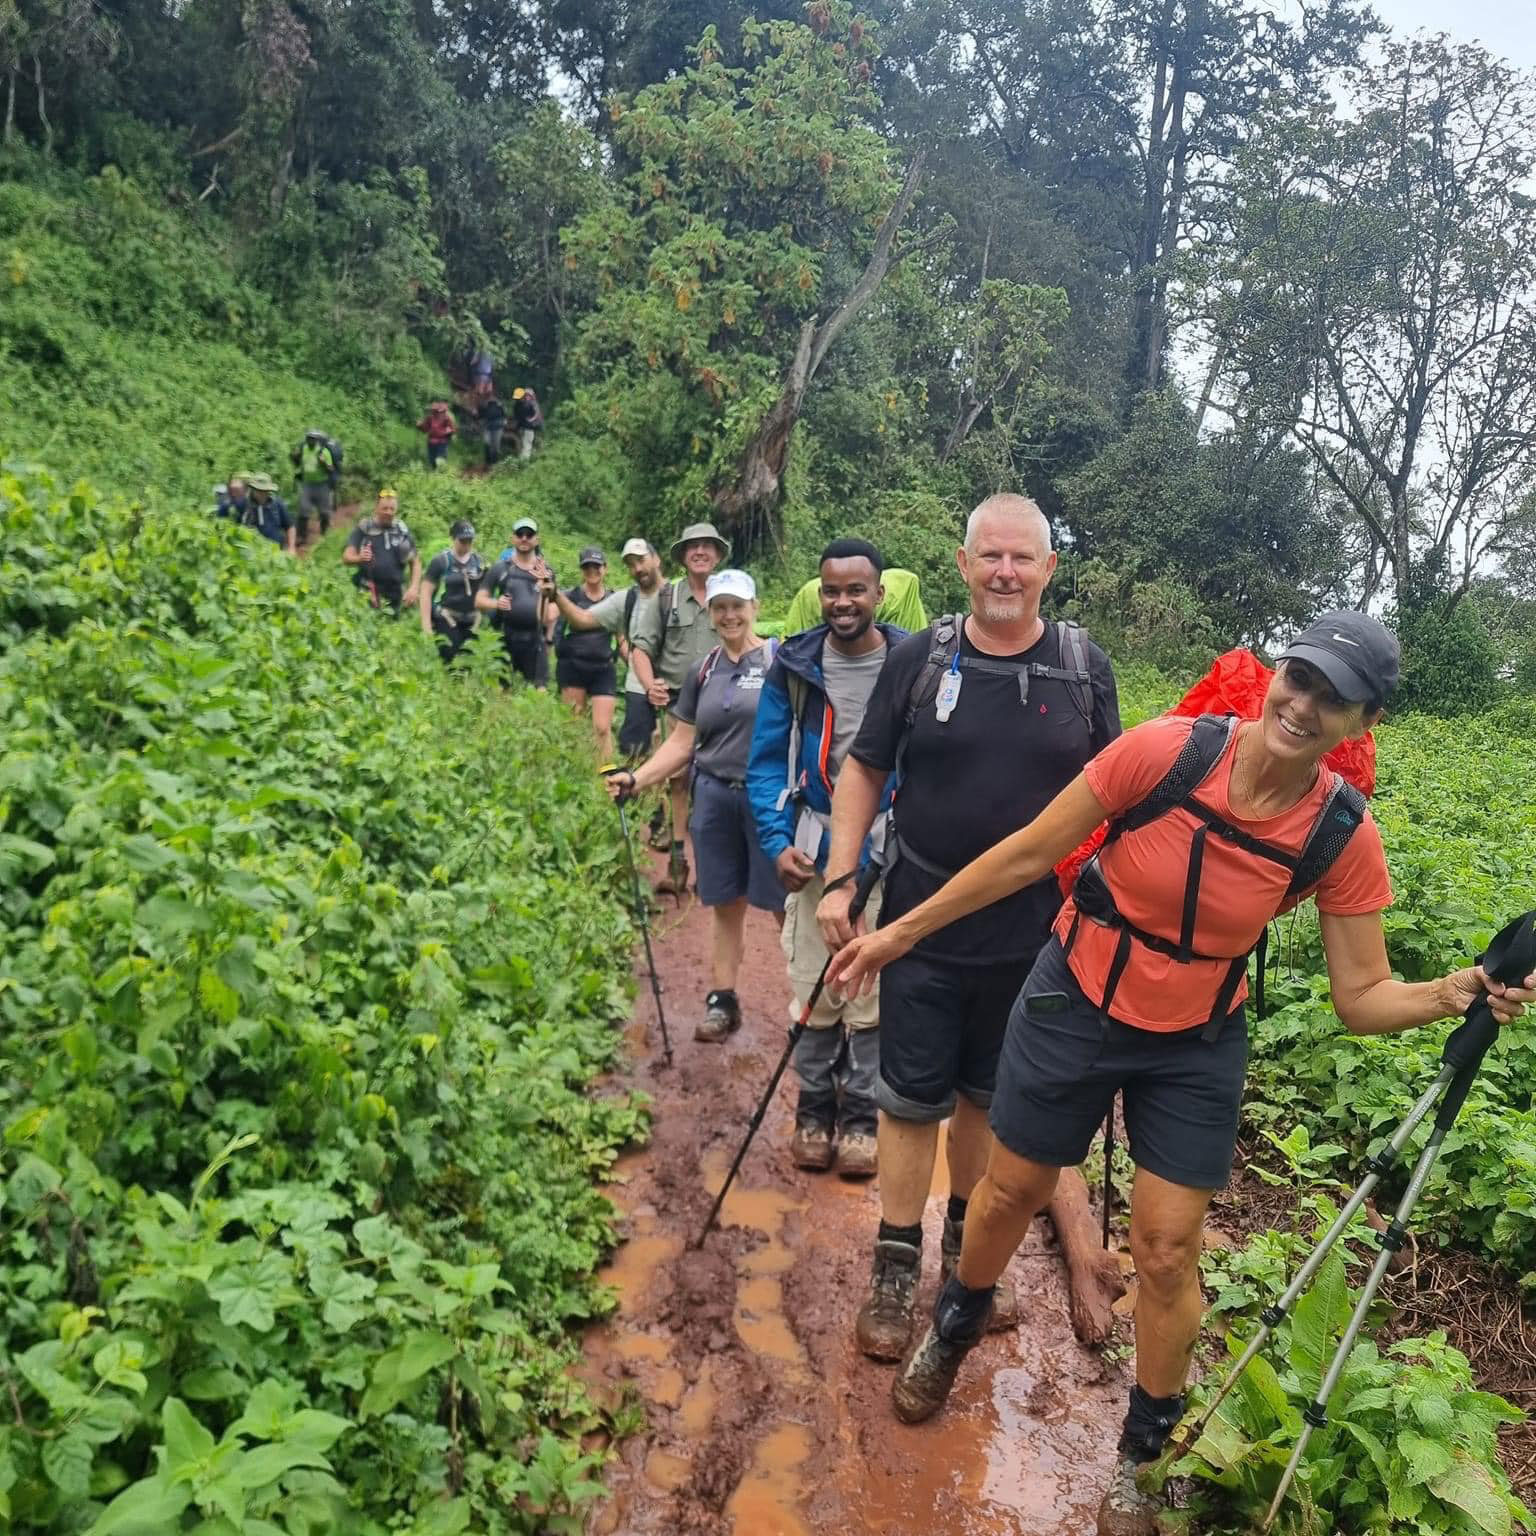 Setting out on the Kilimanjaro trek – bright eyed and bushy-tailed.